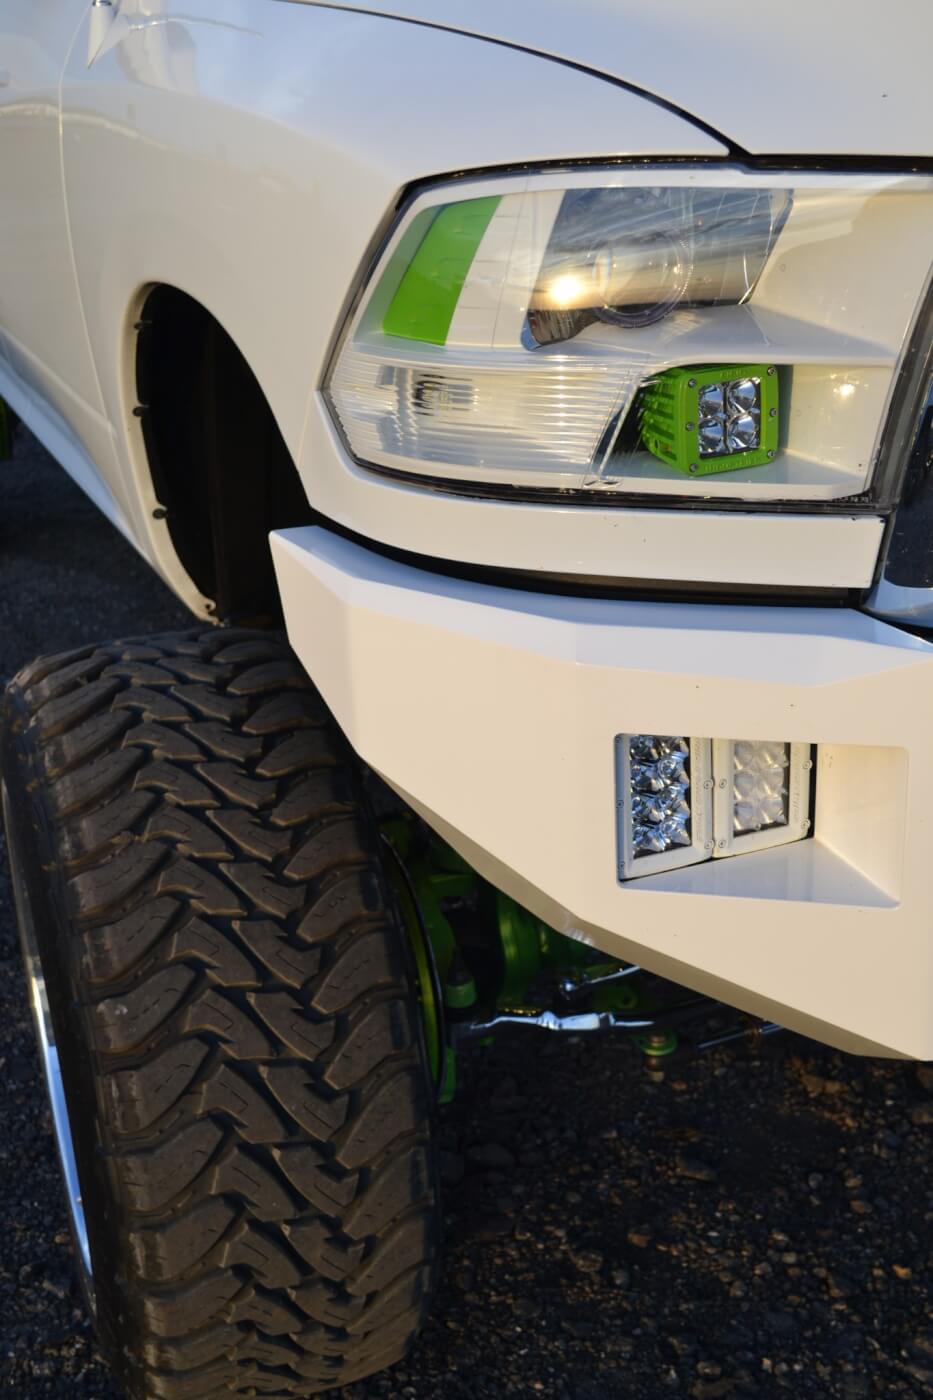 Small details are integrated into the '12 that might not be noticed right away. The headlights for instance, were matched to the rest of the truck by Out of Body Solutions in Modesto, California.